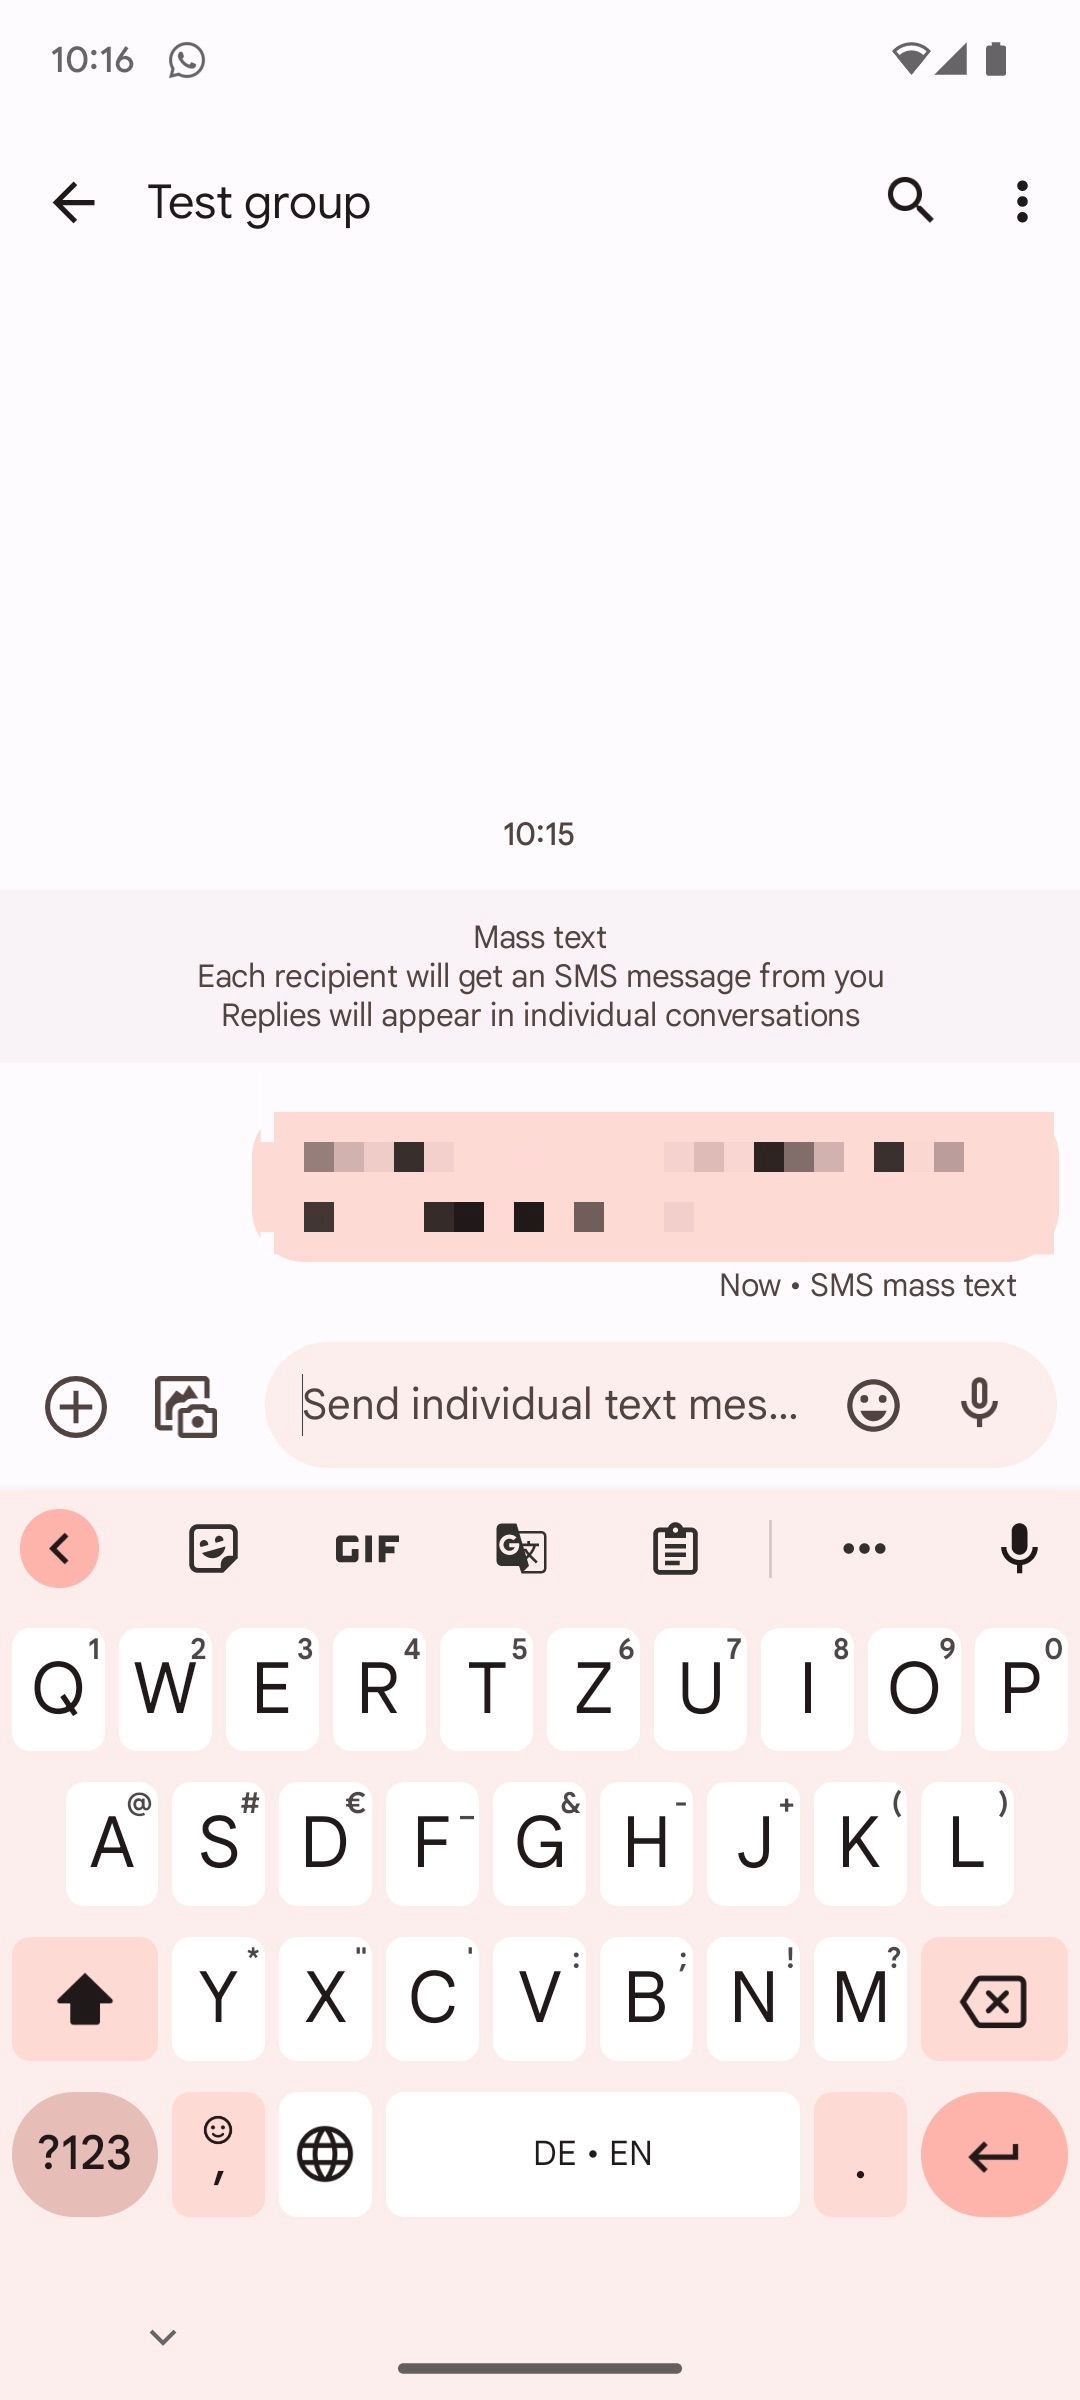 SMS-based group chat in Google Messages